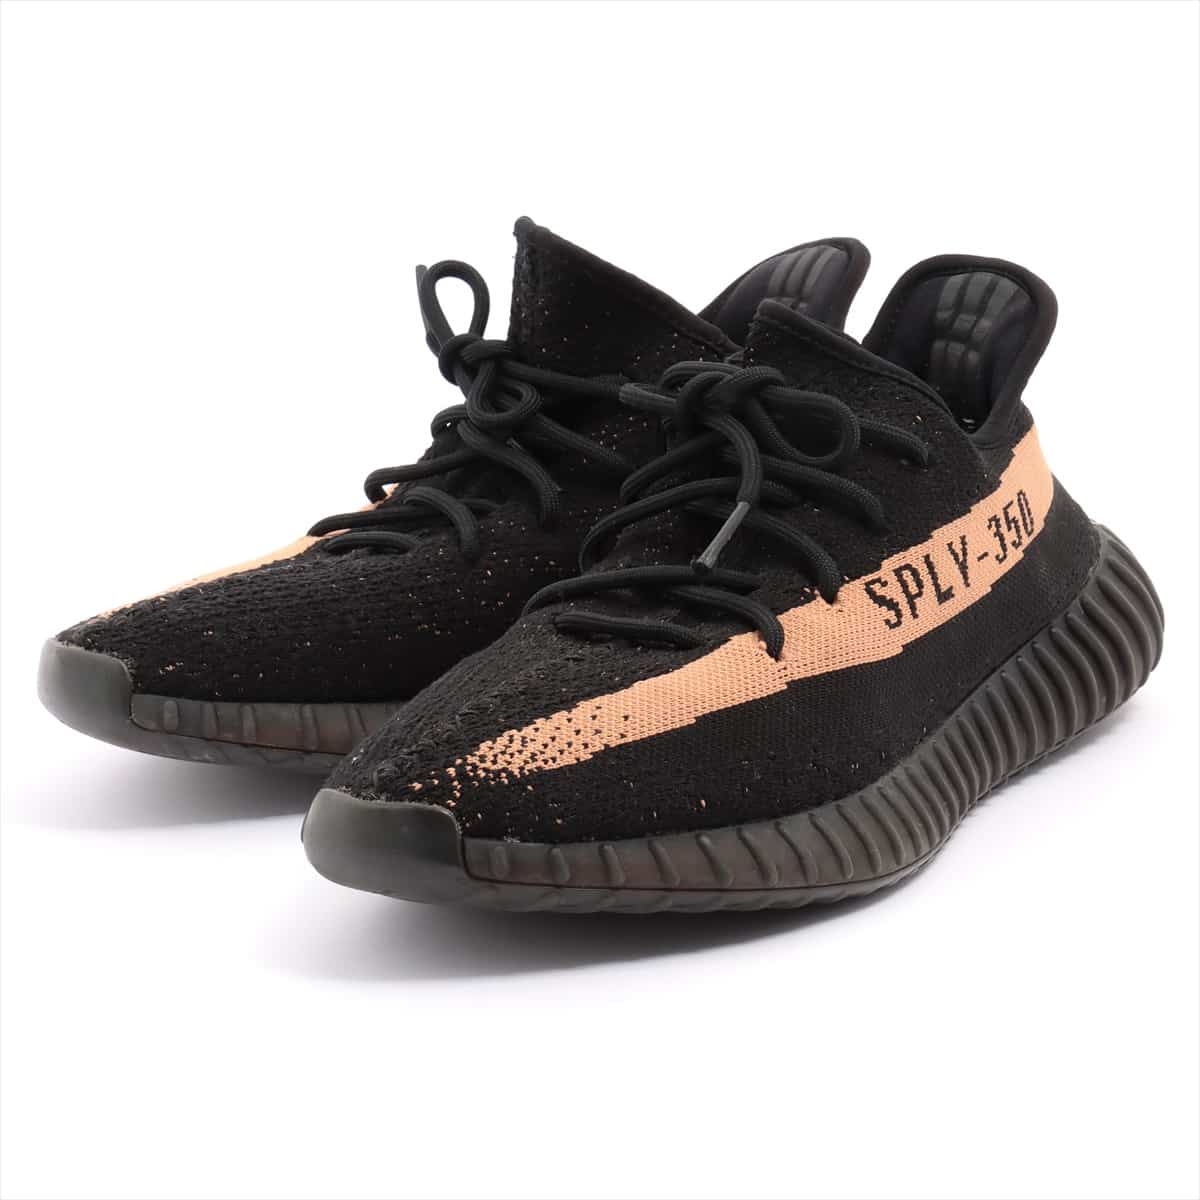 Adidas YEEZY BOOST 350 V2 Knit Sneakers 29.5㎝ Men's Black COPPER BY1605